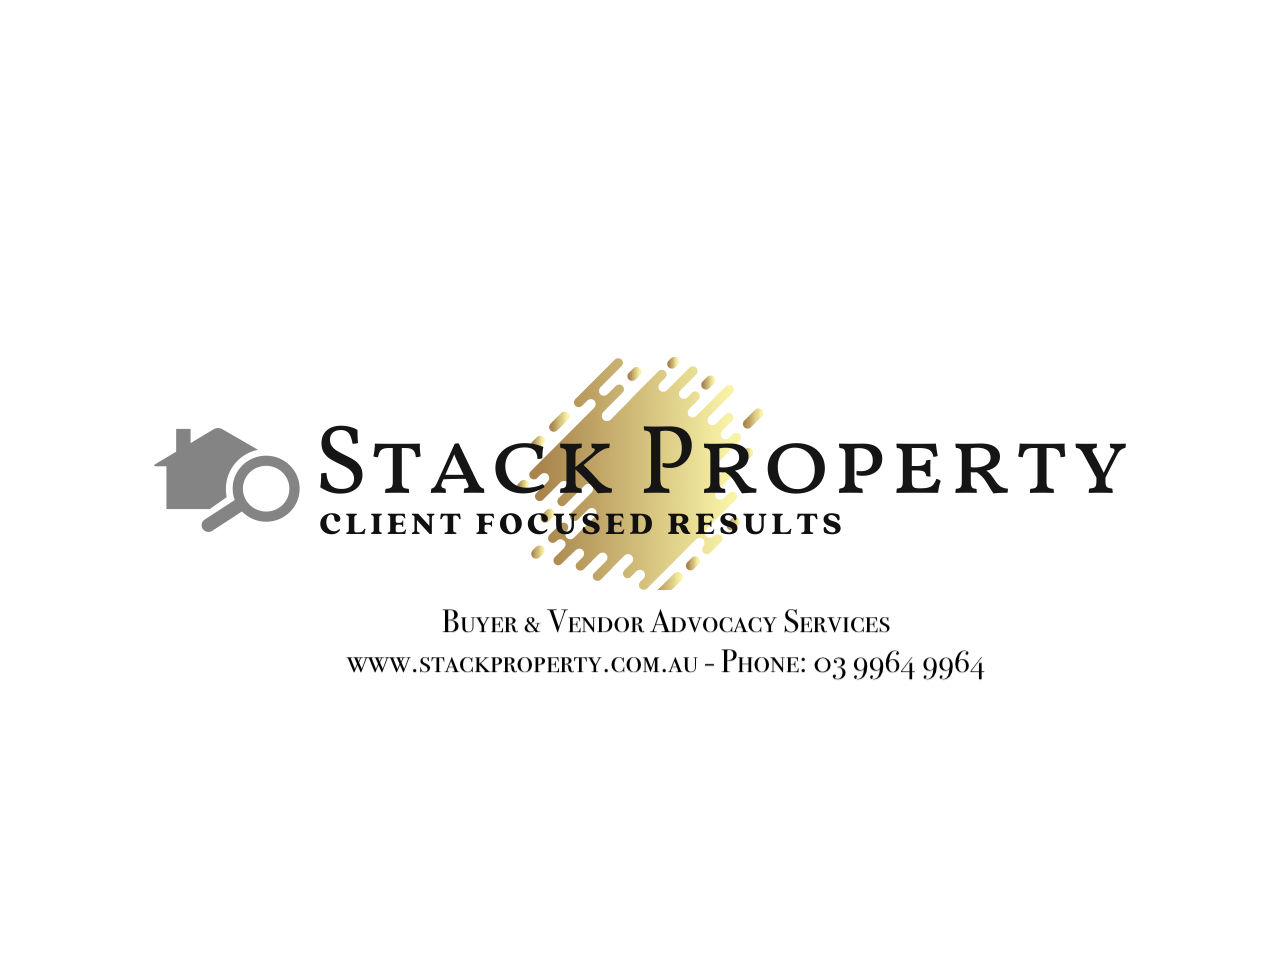 Stack Property